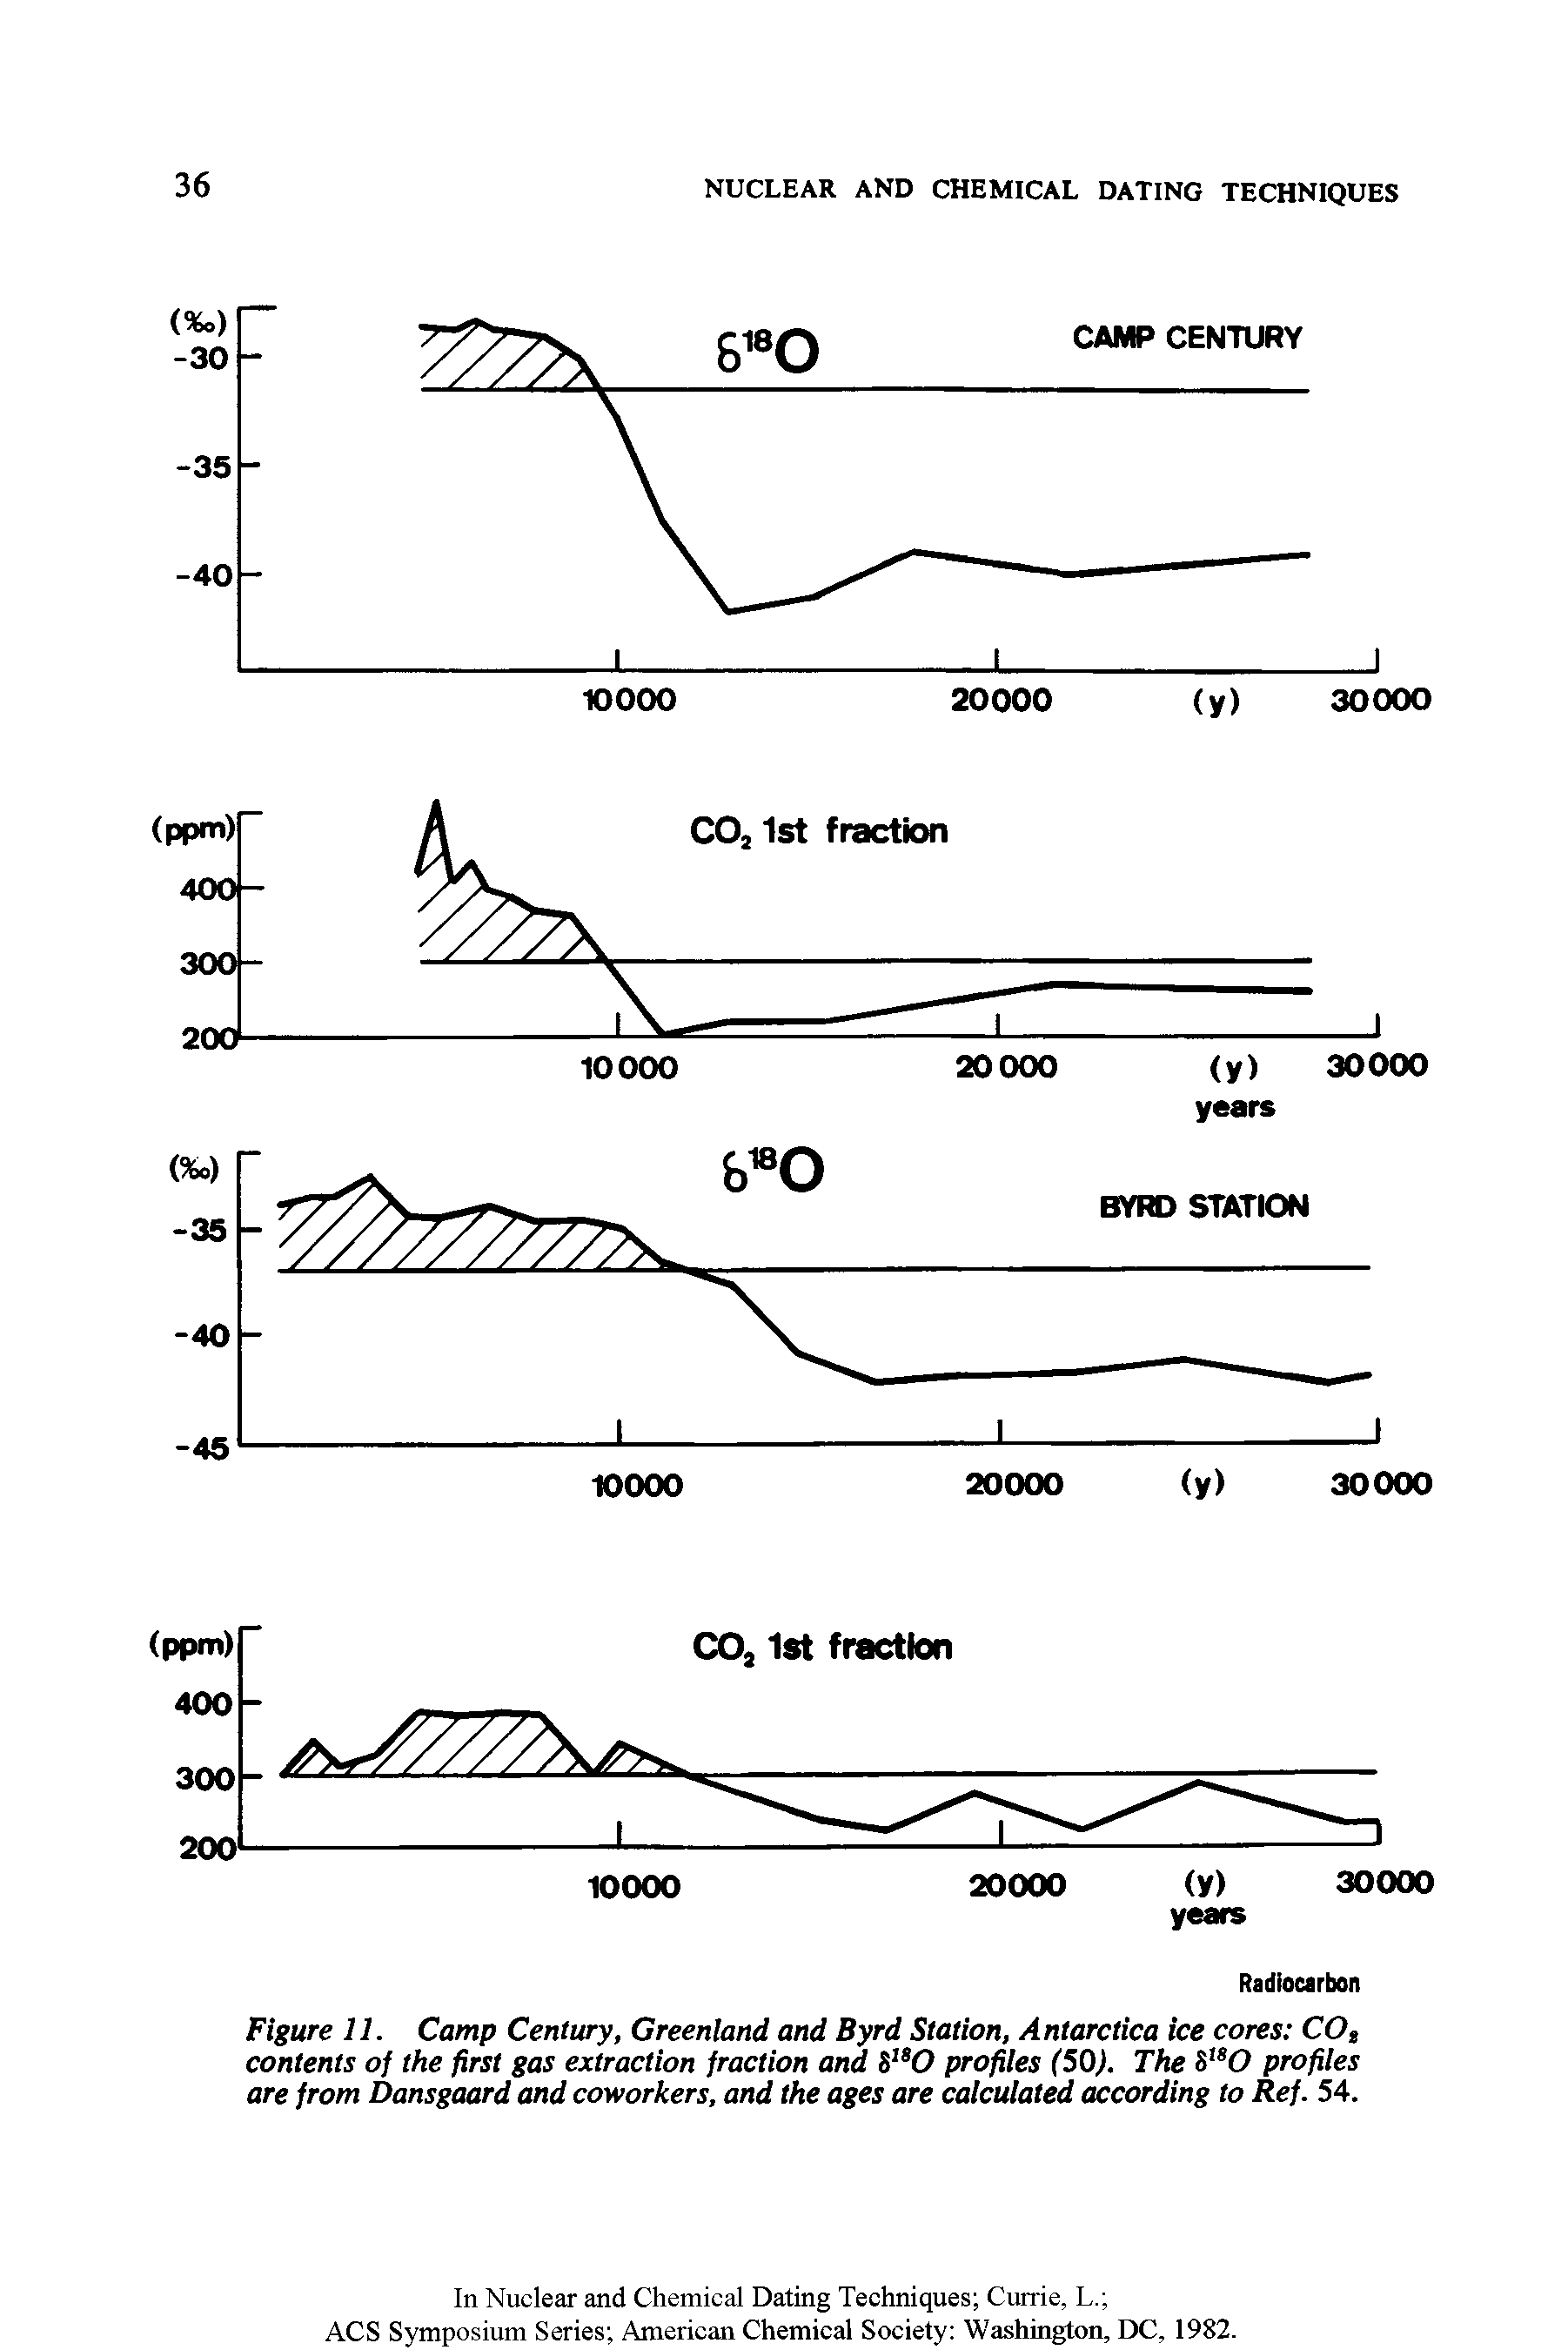 Figure 11. Camp Century, Greenland and Byrd Station, Antarctica ice cores COs contents of the first gas extraction fraction and S1S0 profiles (50). The S,sO profiles are from Dansgaard and coworkers, and the ages are calculated according to Ref. 54.